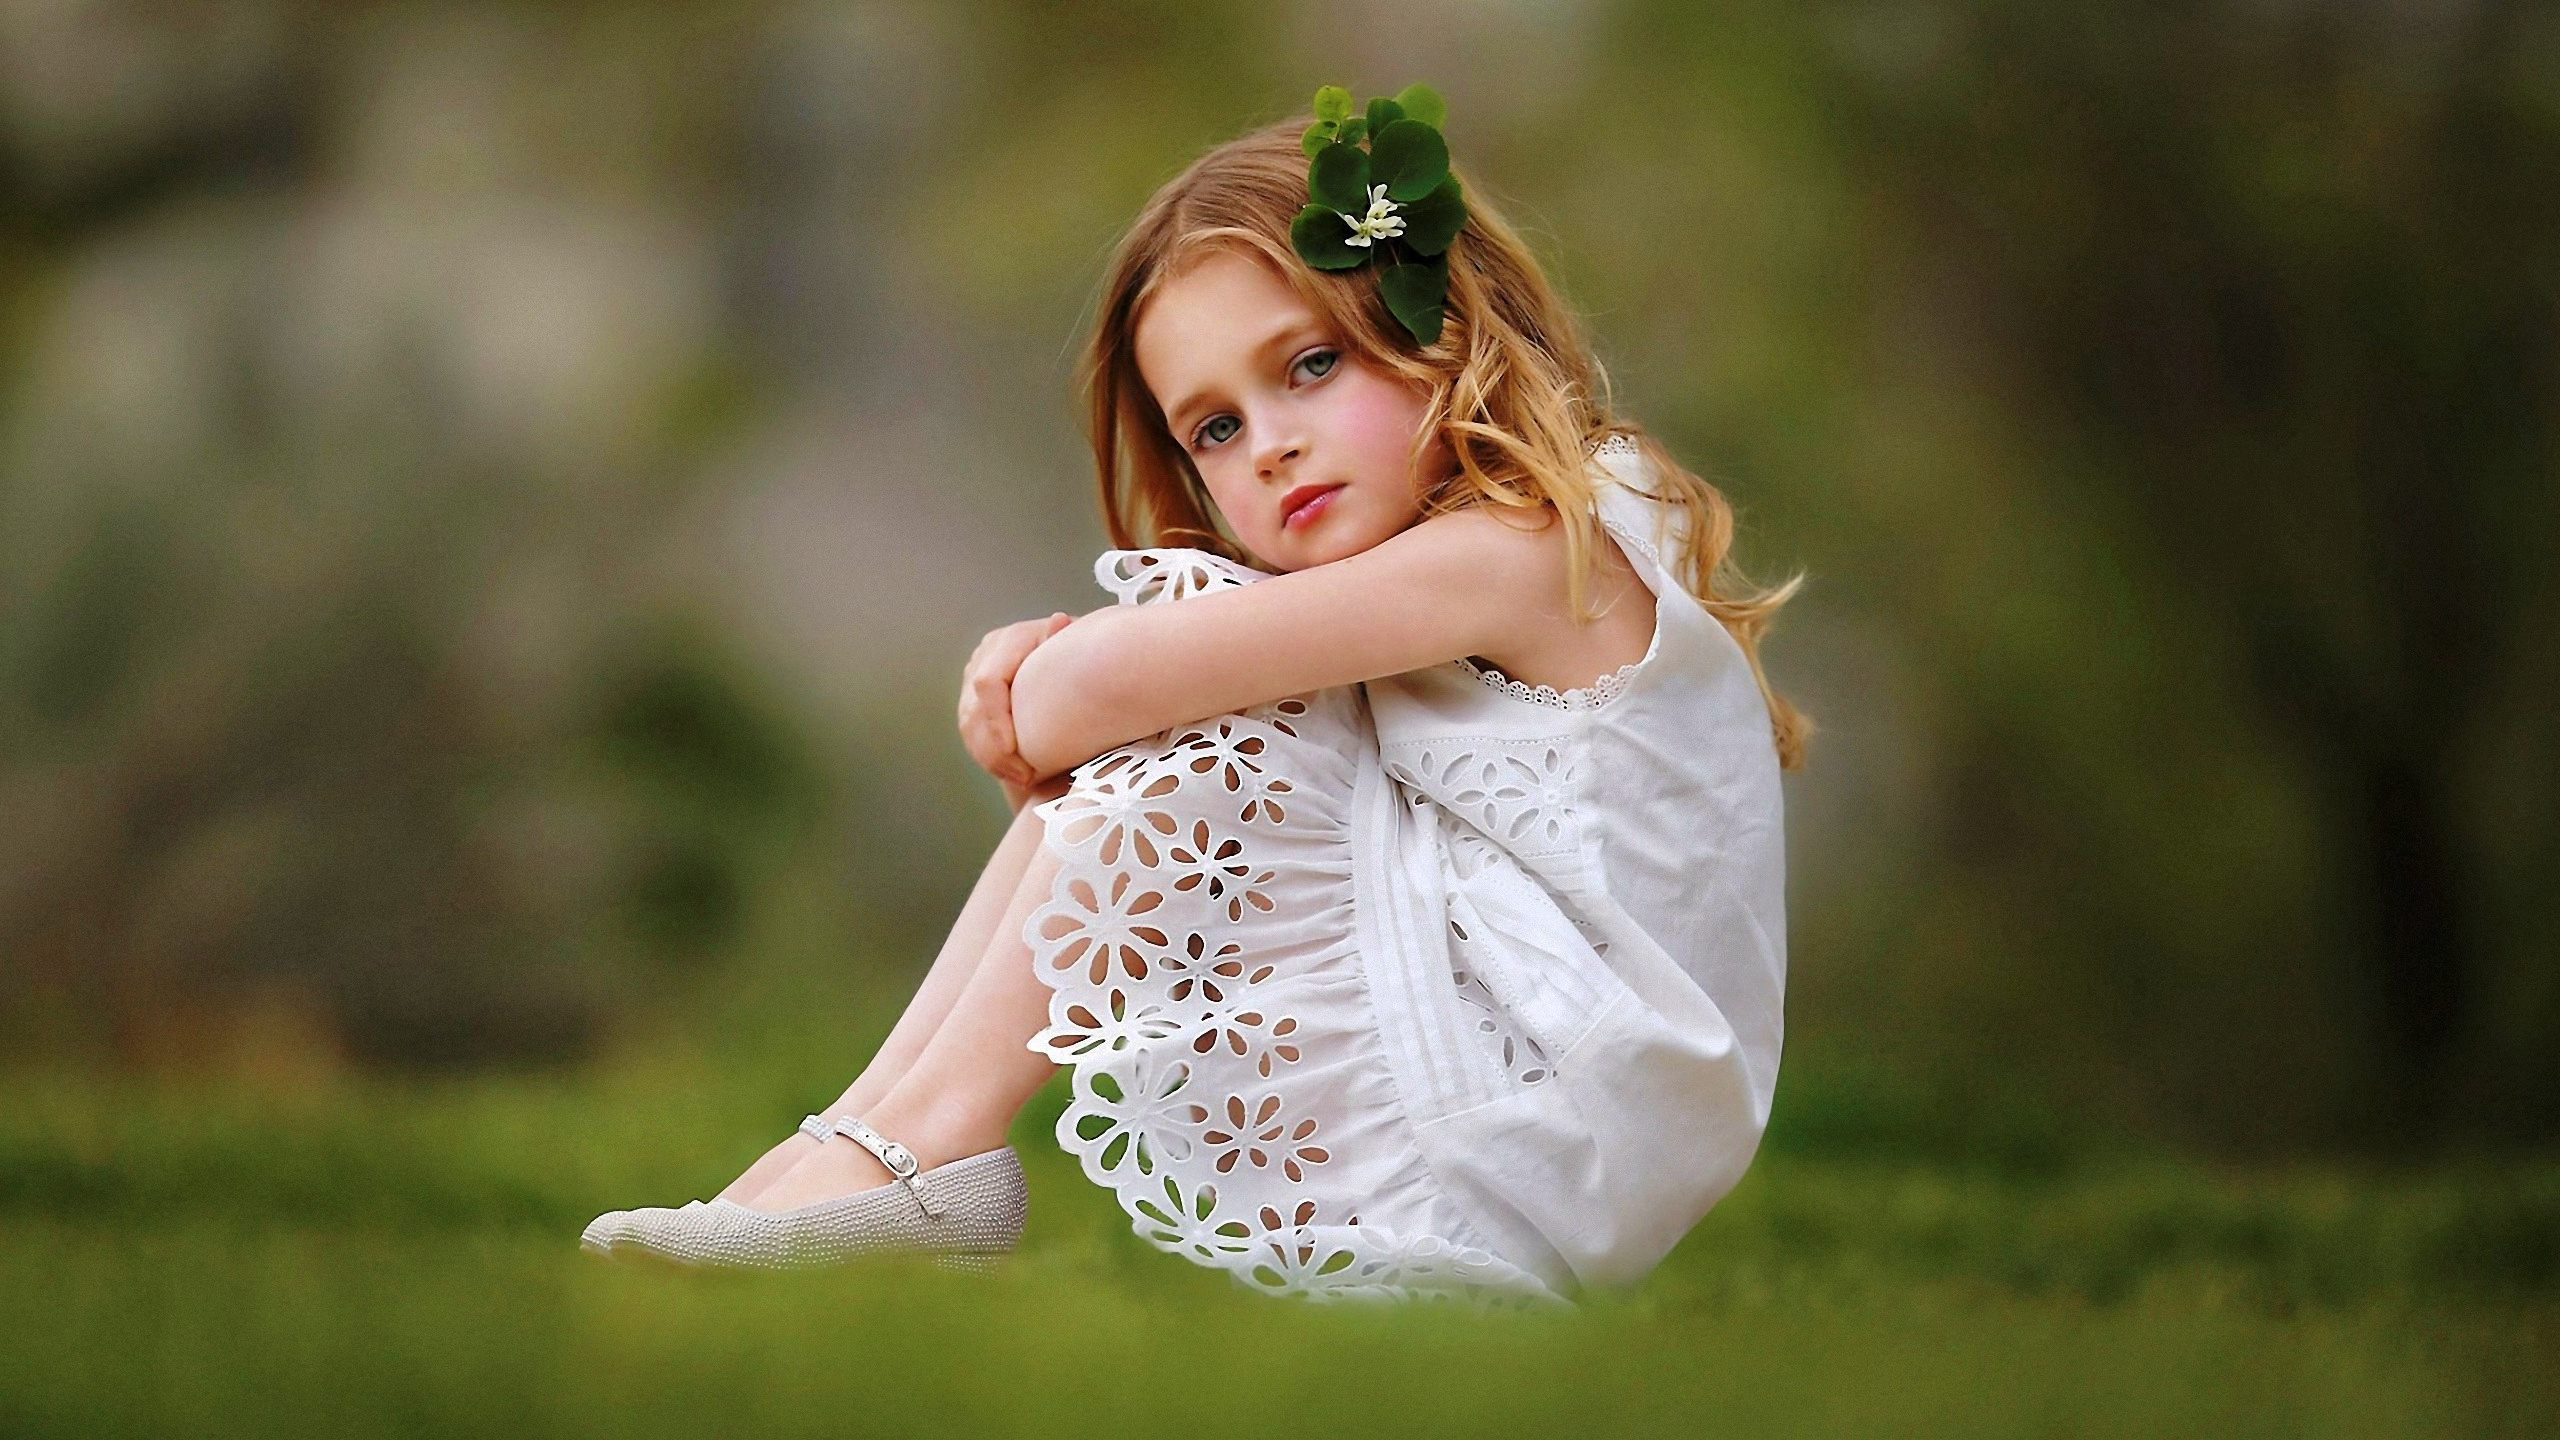 Cute Girl Baby Is Wearing White Dress Sitting On Grass Facing One Side And  Having Green Leaves On Head In A Blur Background HD Cute HD Wallpaper | HD  Wallpapers